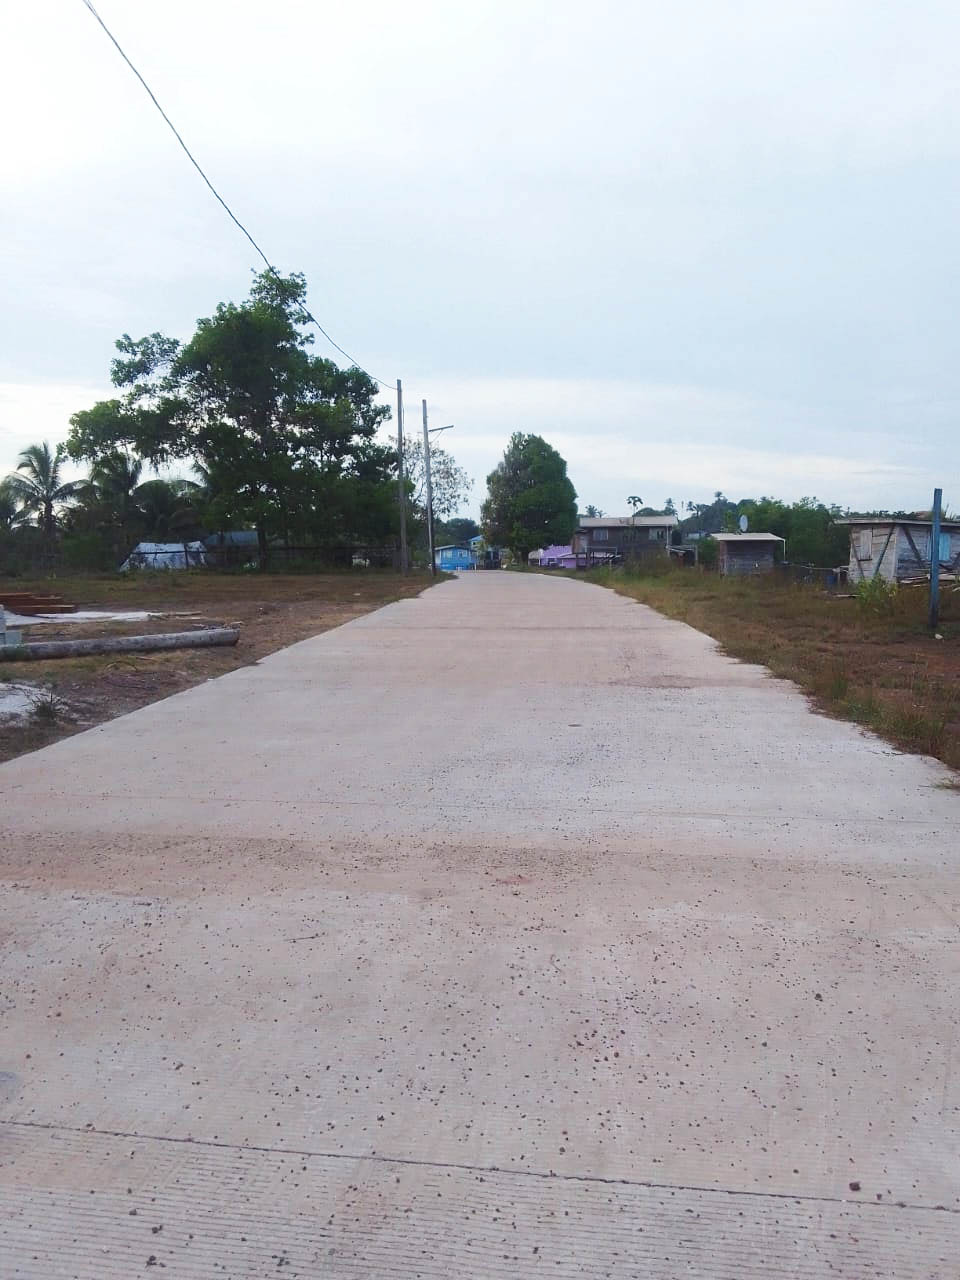 Mahdia residents unhappy with $60m road project - Stabroek News